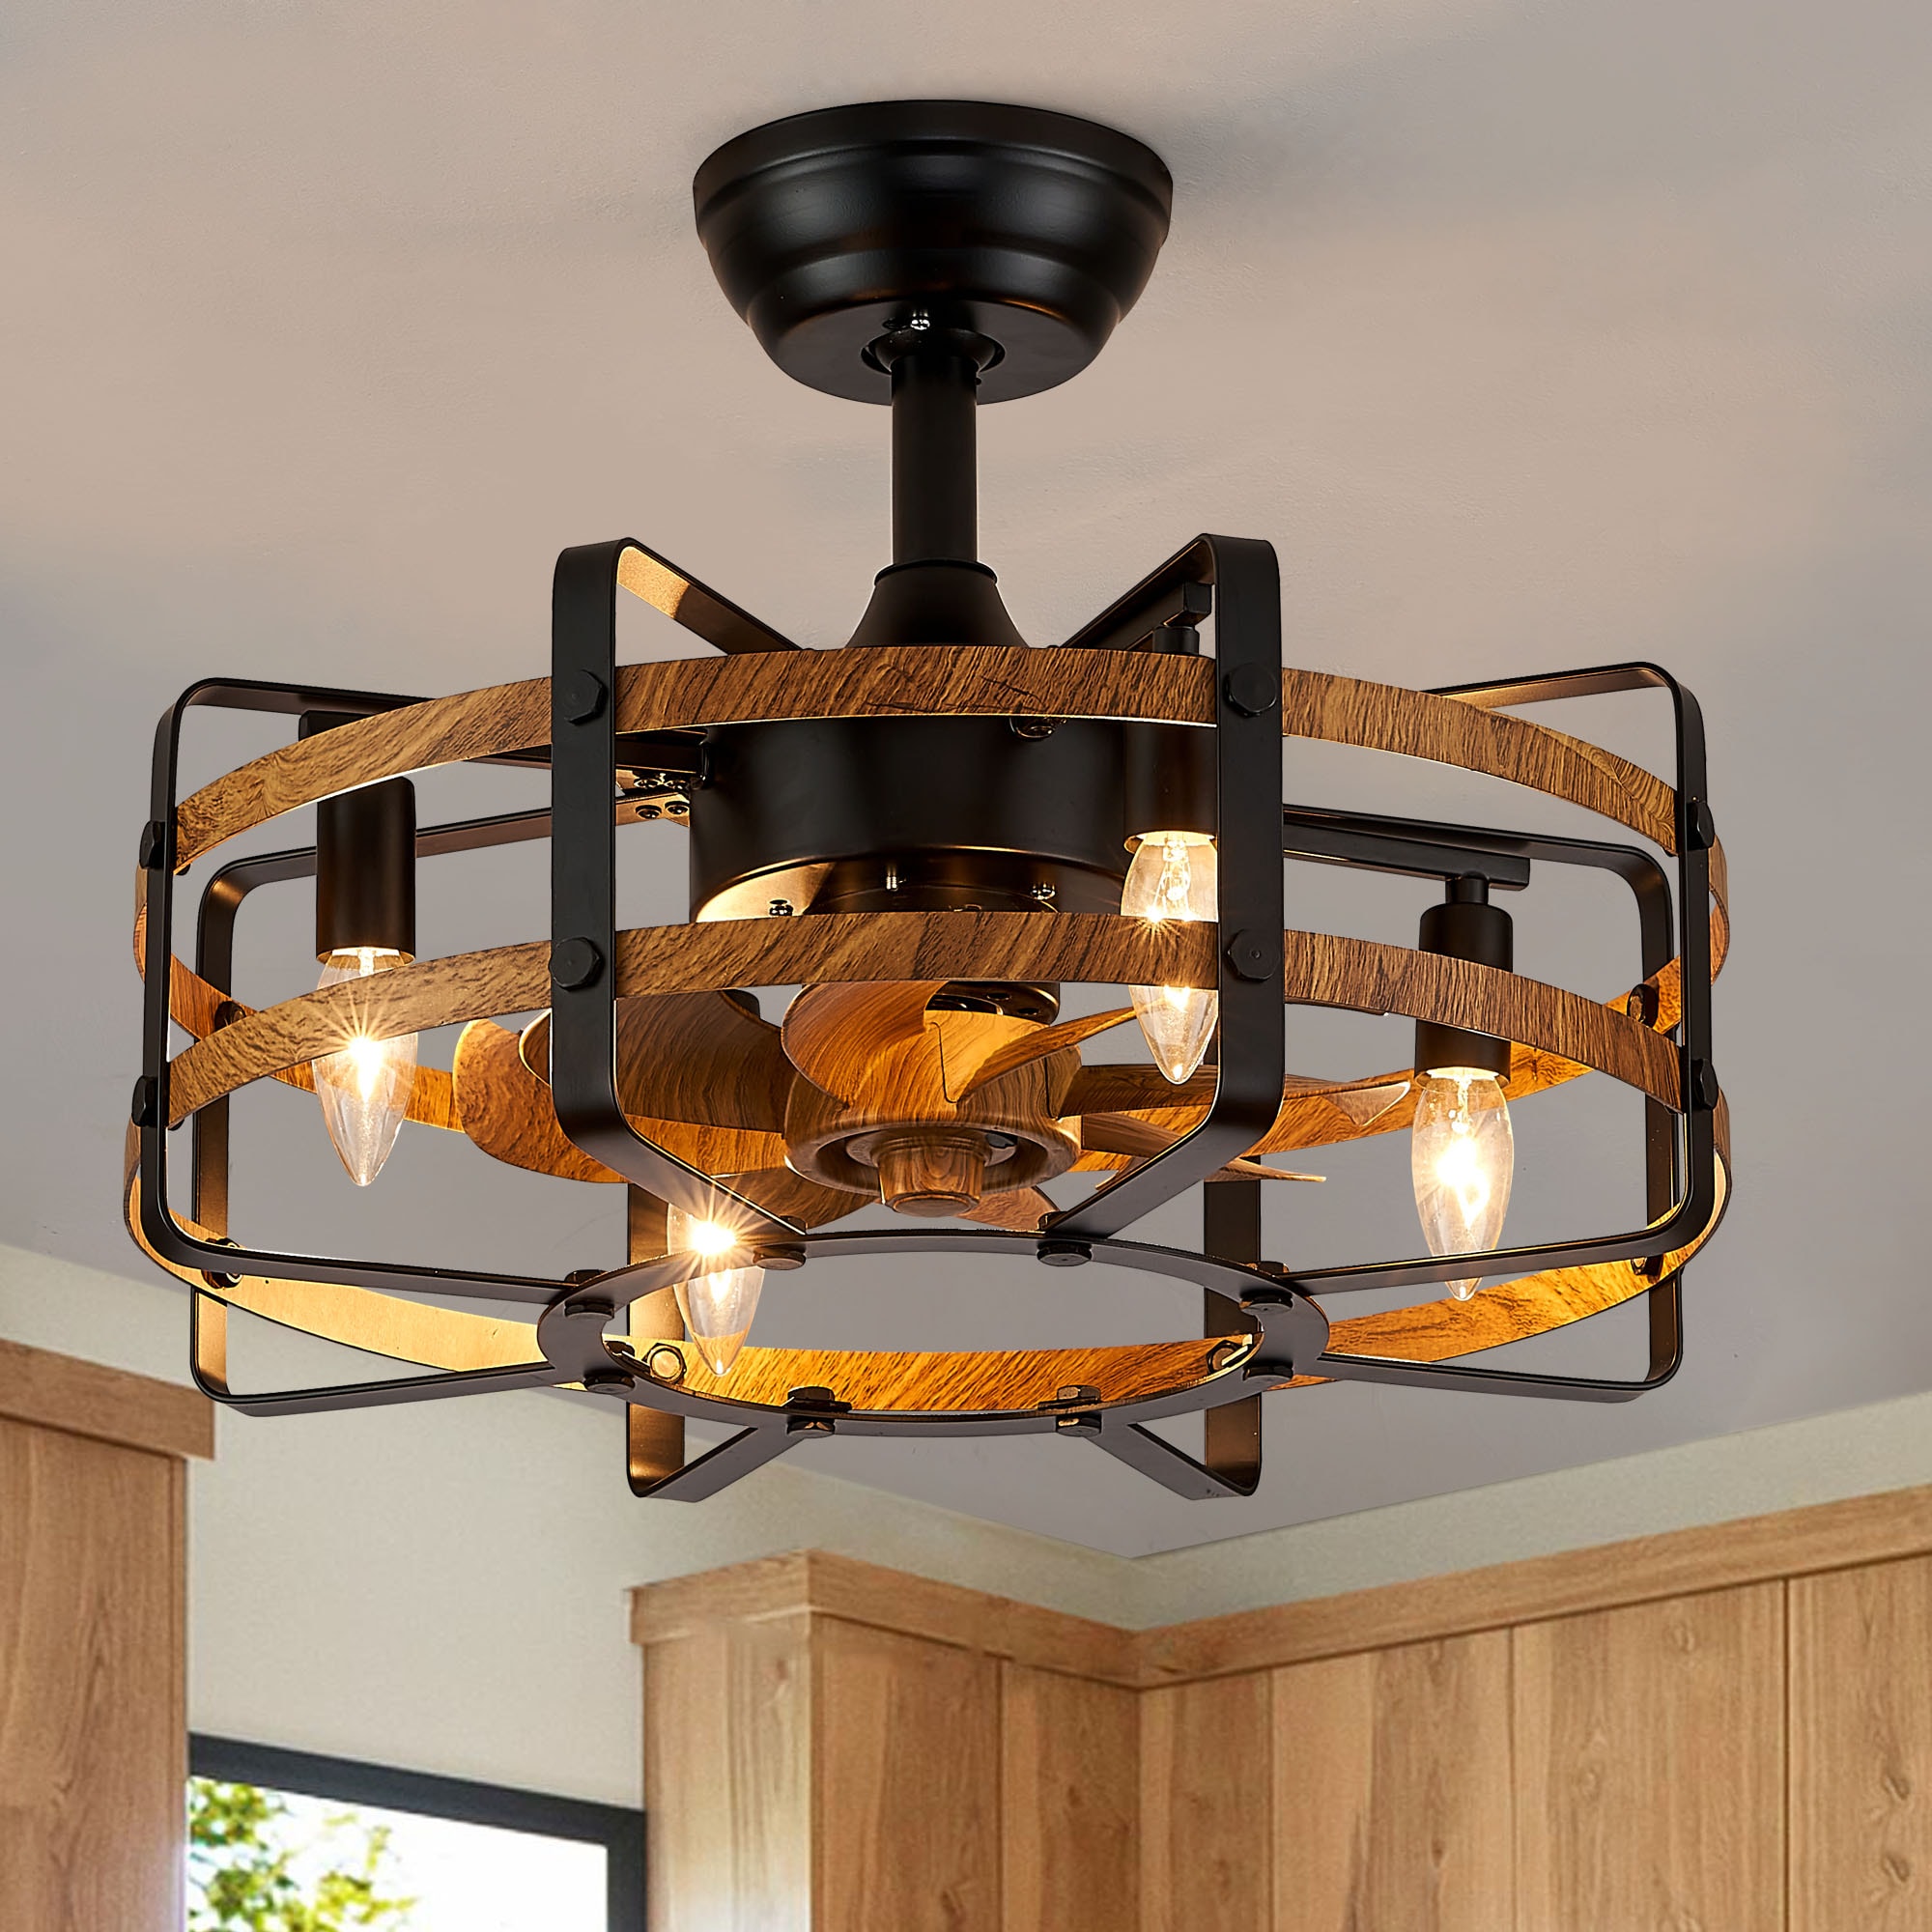 Antoine Modern in at Black Cage Fans Grain Remote Fan and Wood Indoor Ceiling Ceiling Fandelier department Low the 20-in Profile Farmhouse (8-Blade)